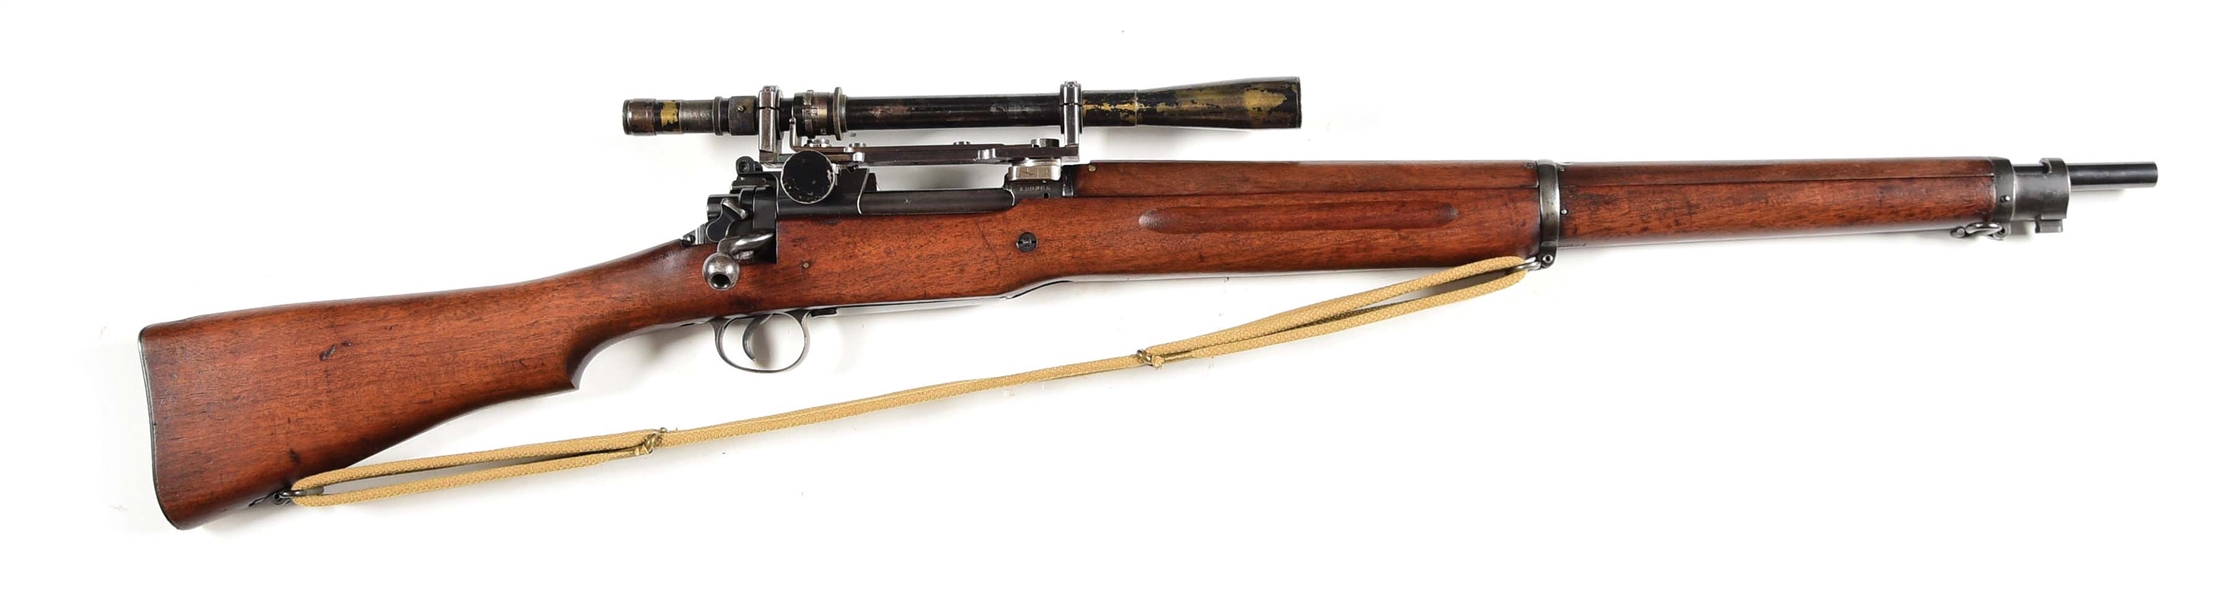 (C) IMPORTANT PATTERN ENFIELD P14 SNIPER PROTOTYPE BOLT ACTION RIFLE.